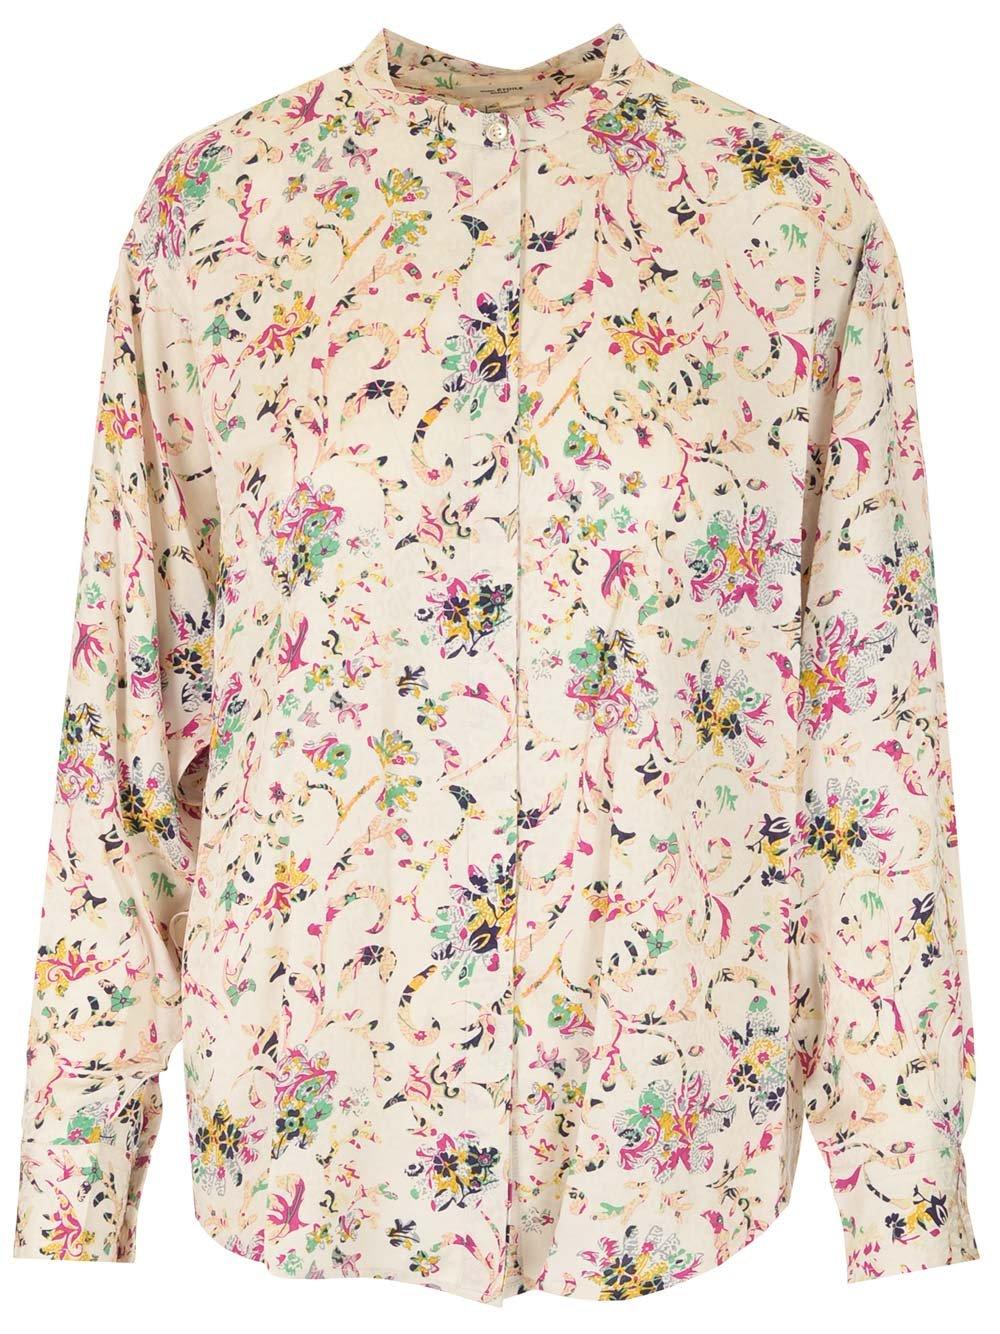 Isabel Marant Étoile All-over Floral Print Top